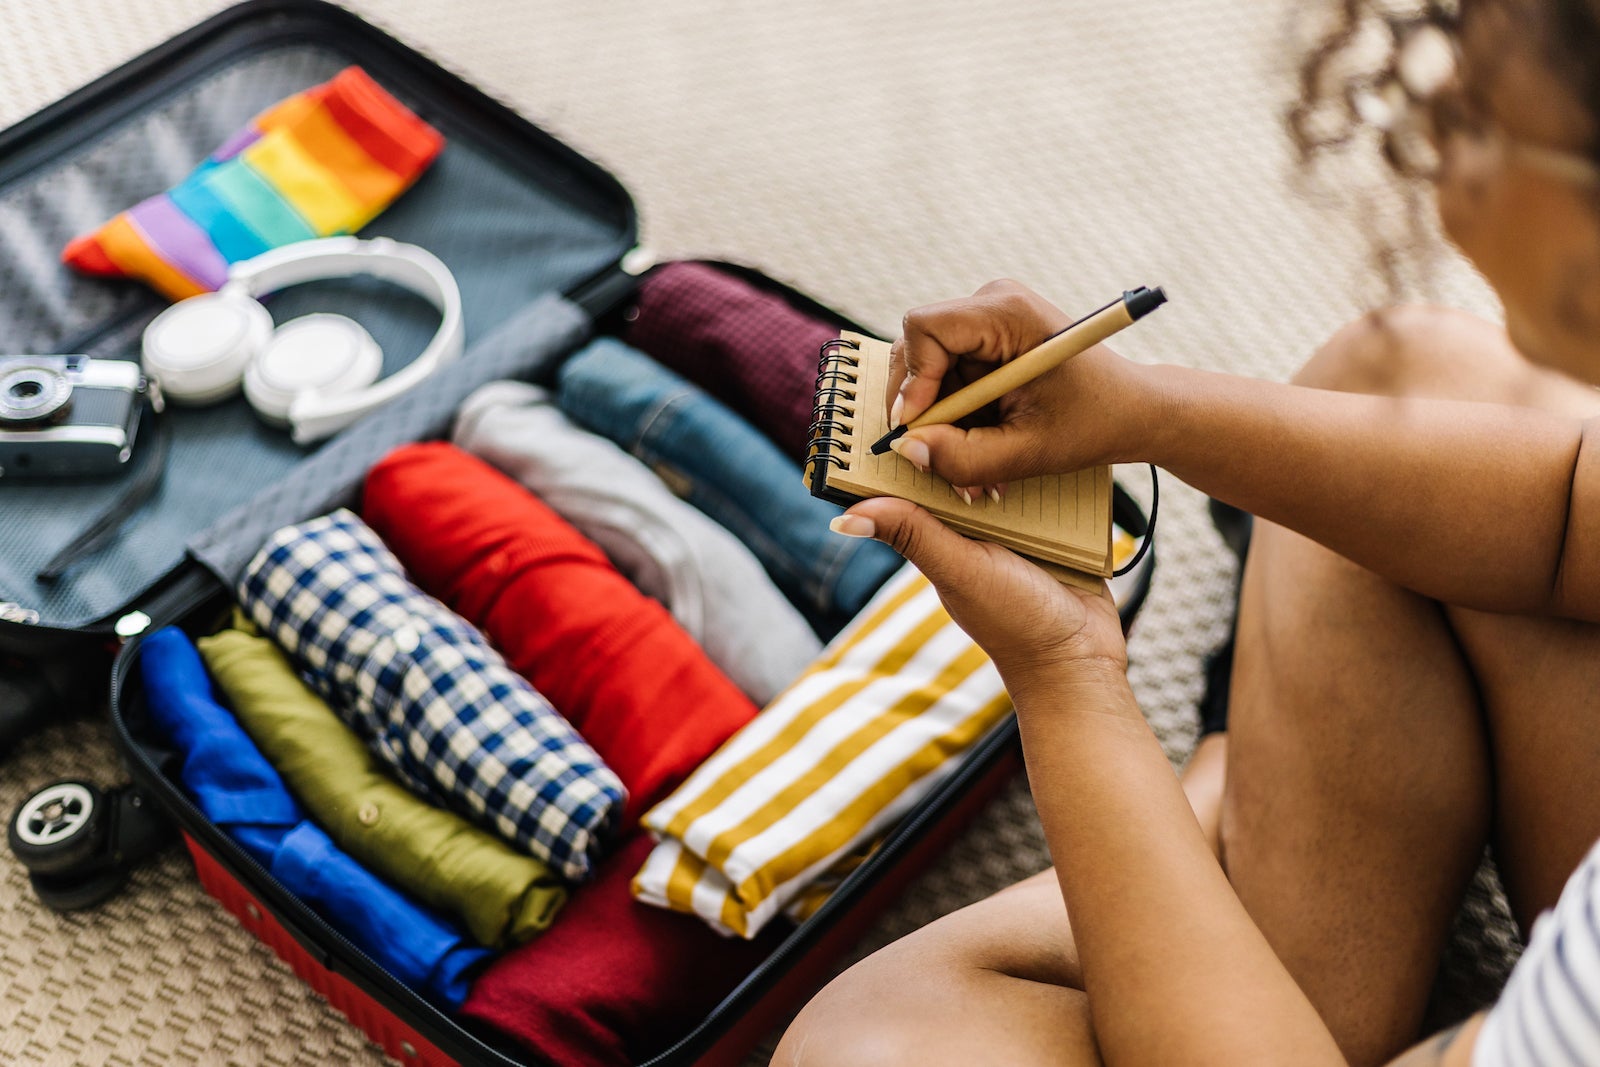 Here’s how I pack light when traveling with my family